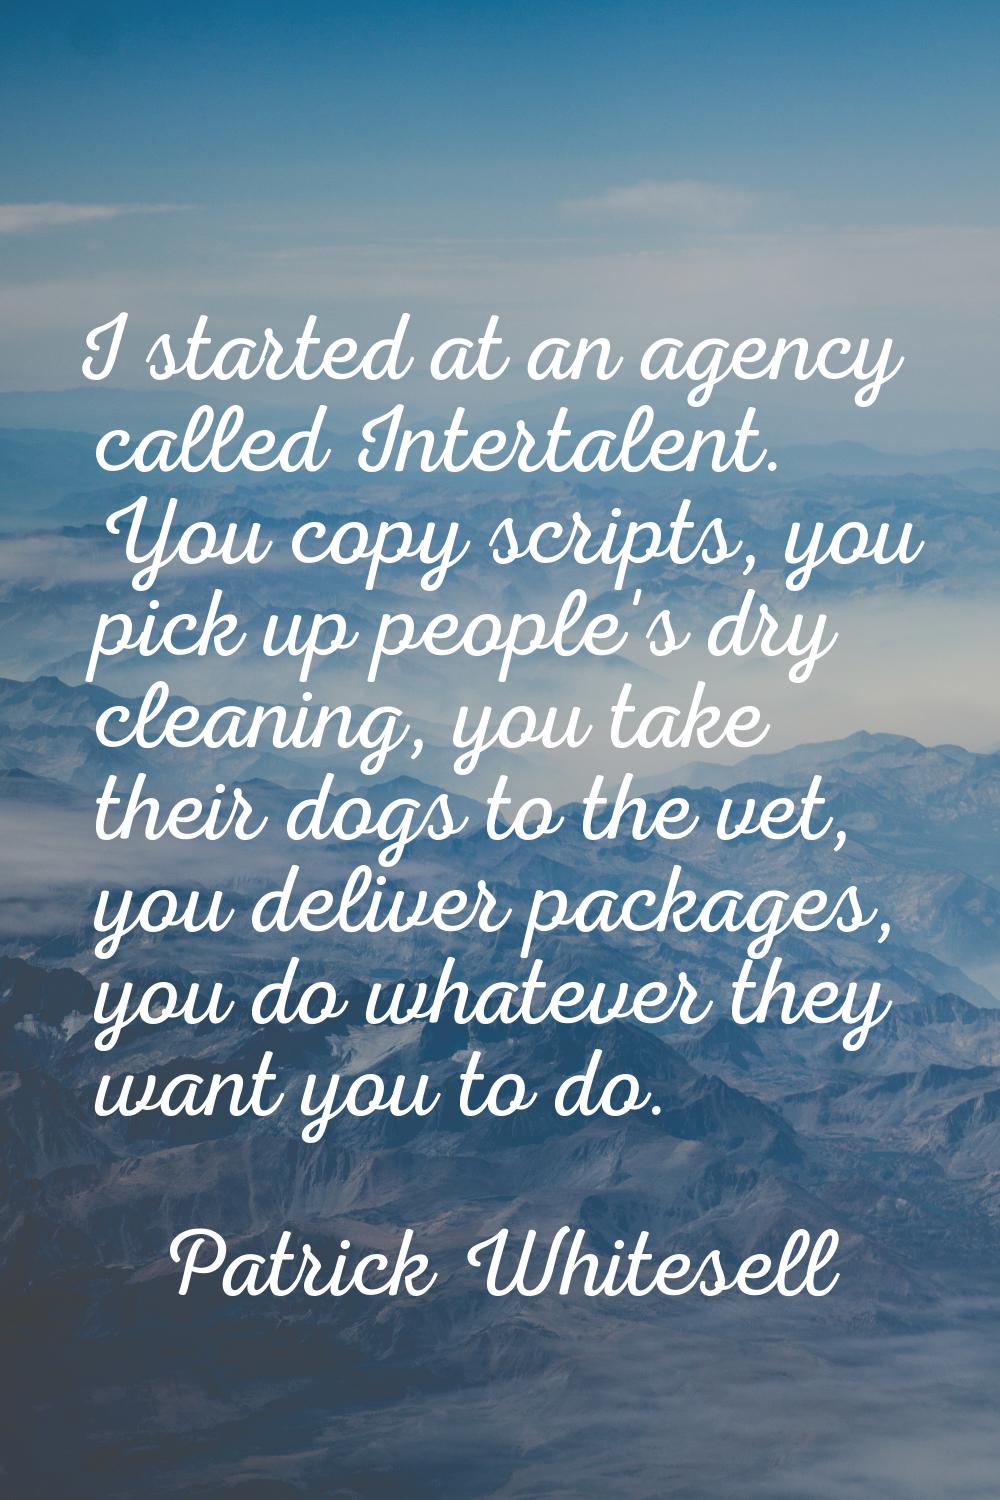 I started at an agency called Intertalent. You copy scripts, you pick up people's dry cleaning, you